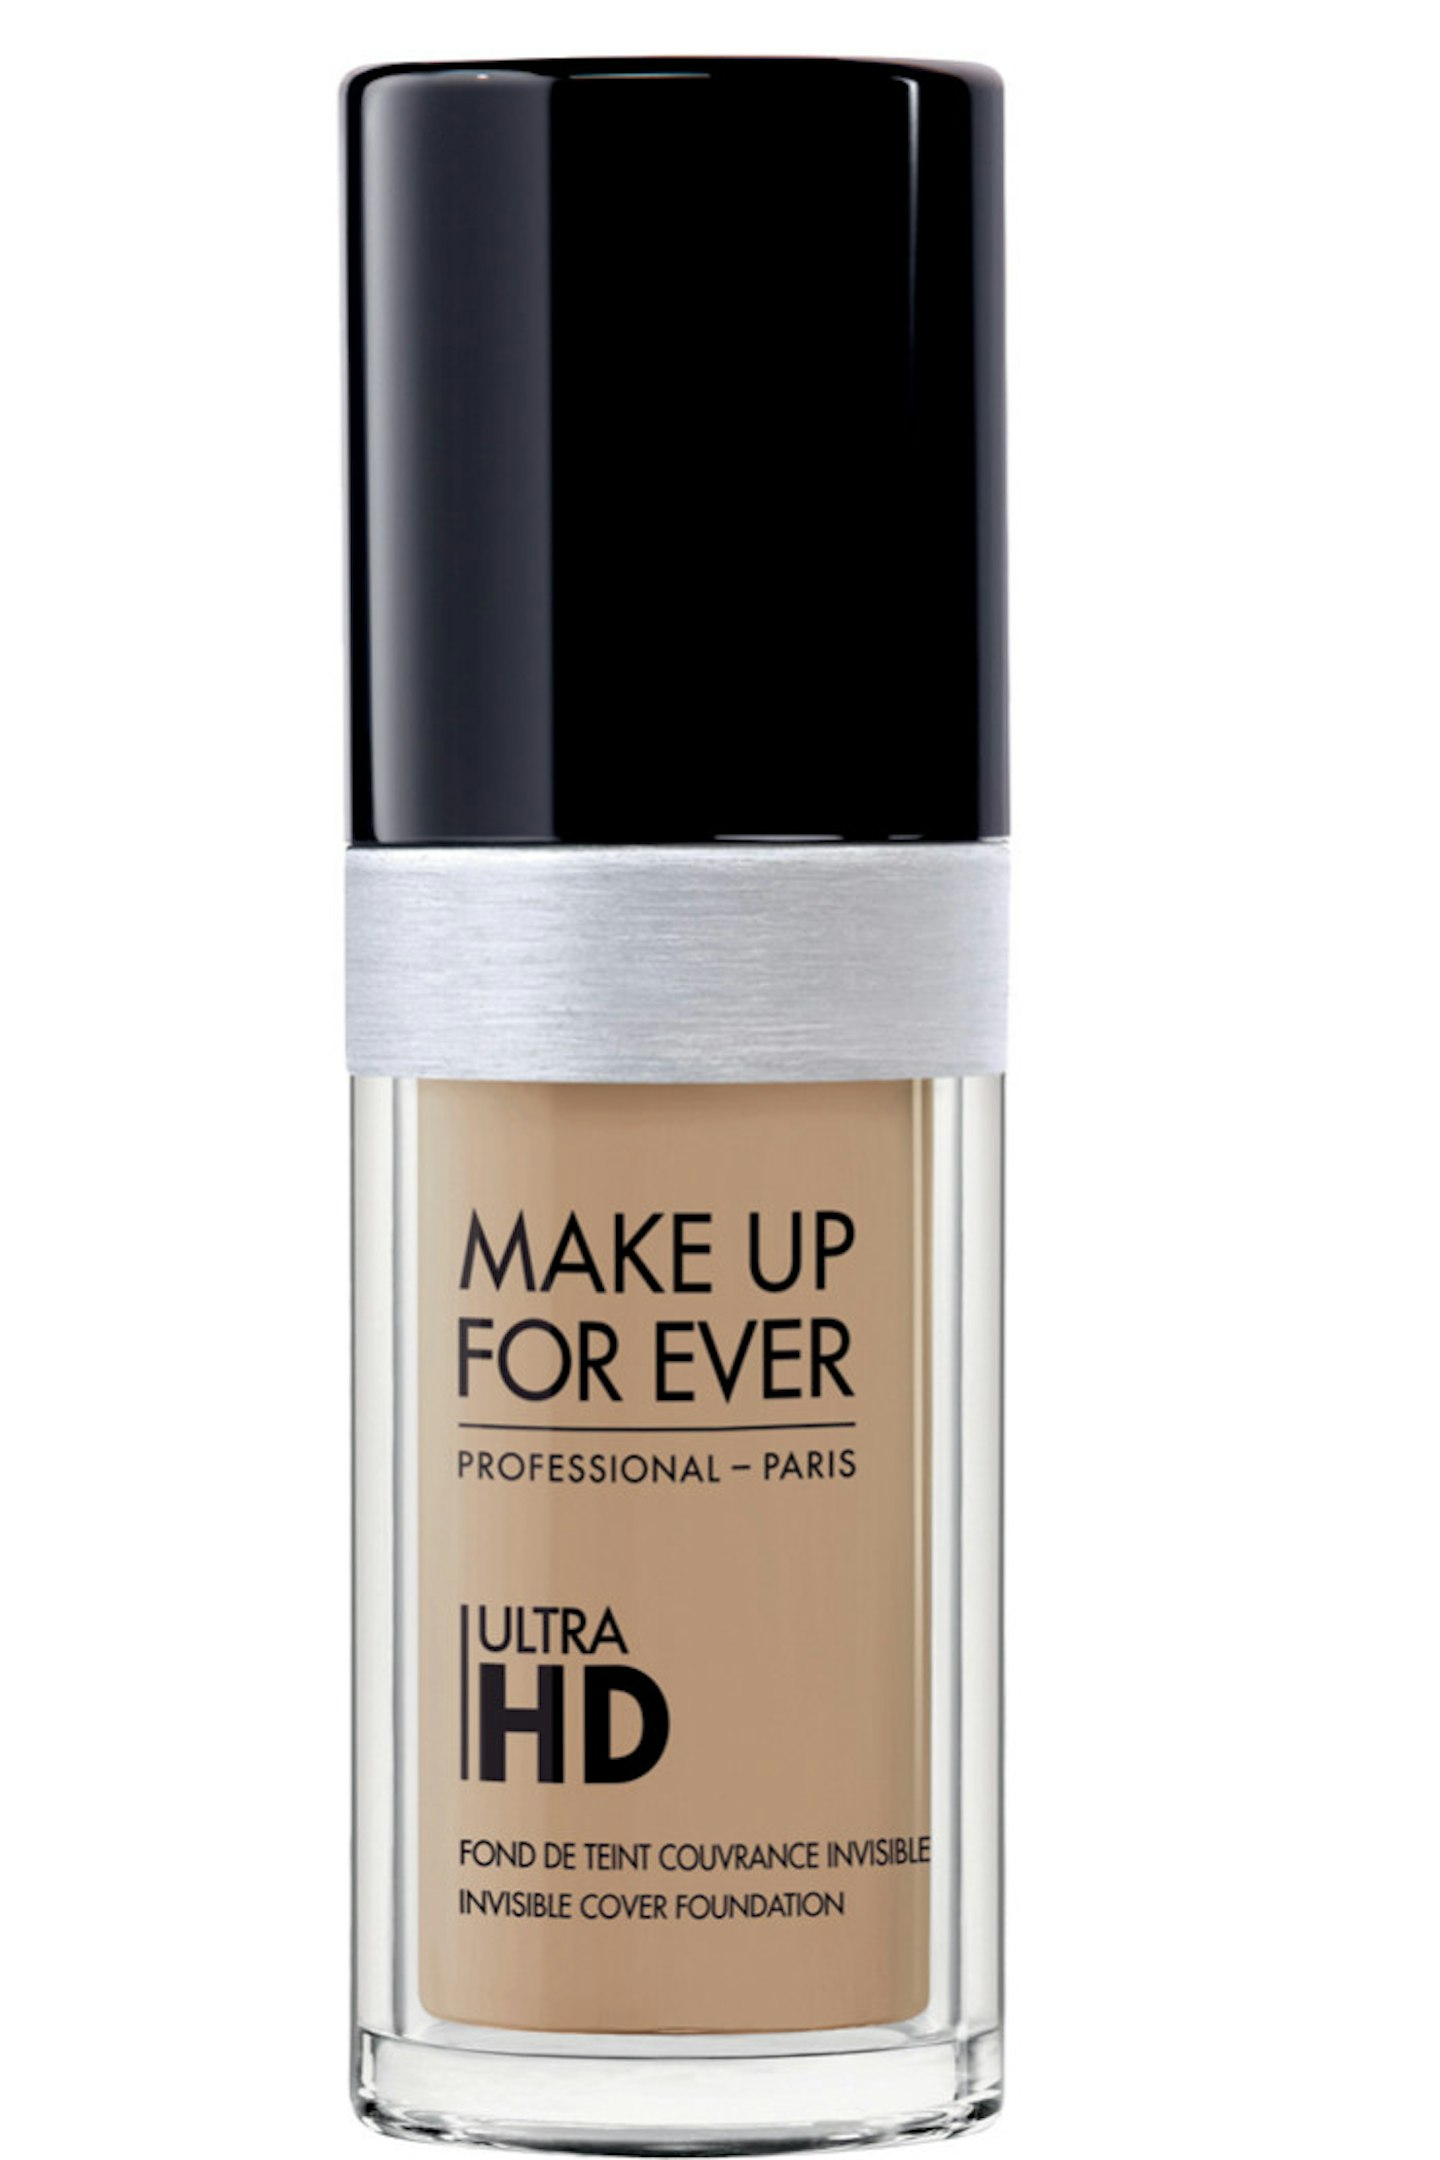 Make Up For Ever Ultra HD Foundation, £29.00